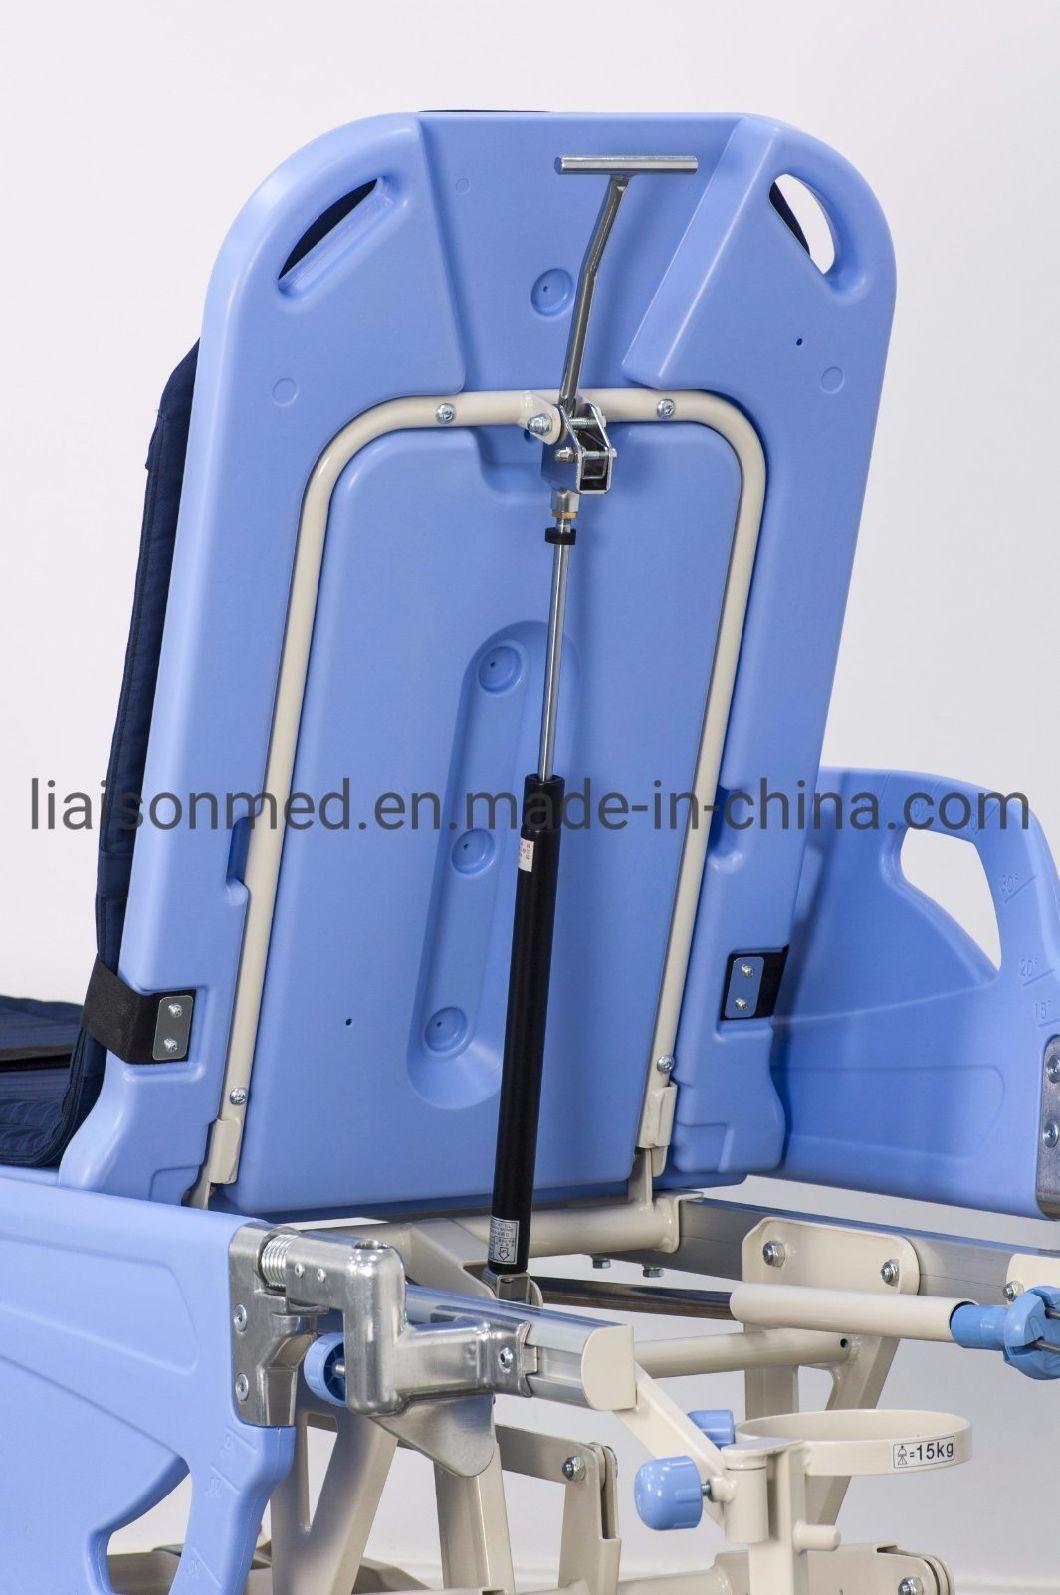 Mn-Yd001 ABS Medical Equipment Hospital Type Device Clinic Emergency Patient Transport Stretcher